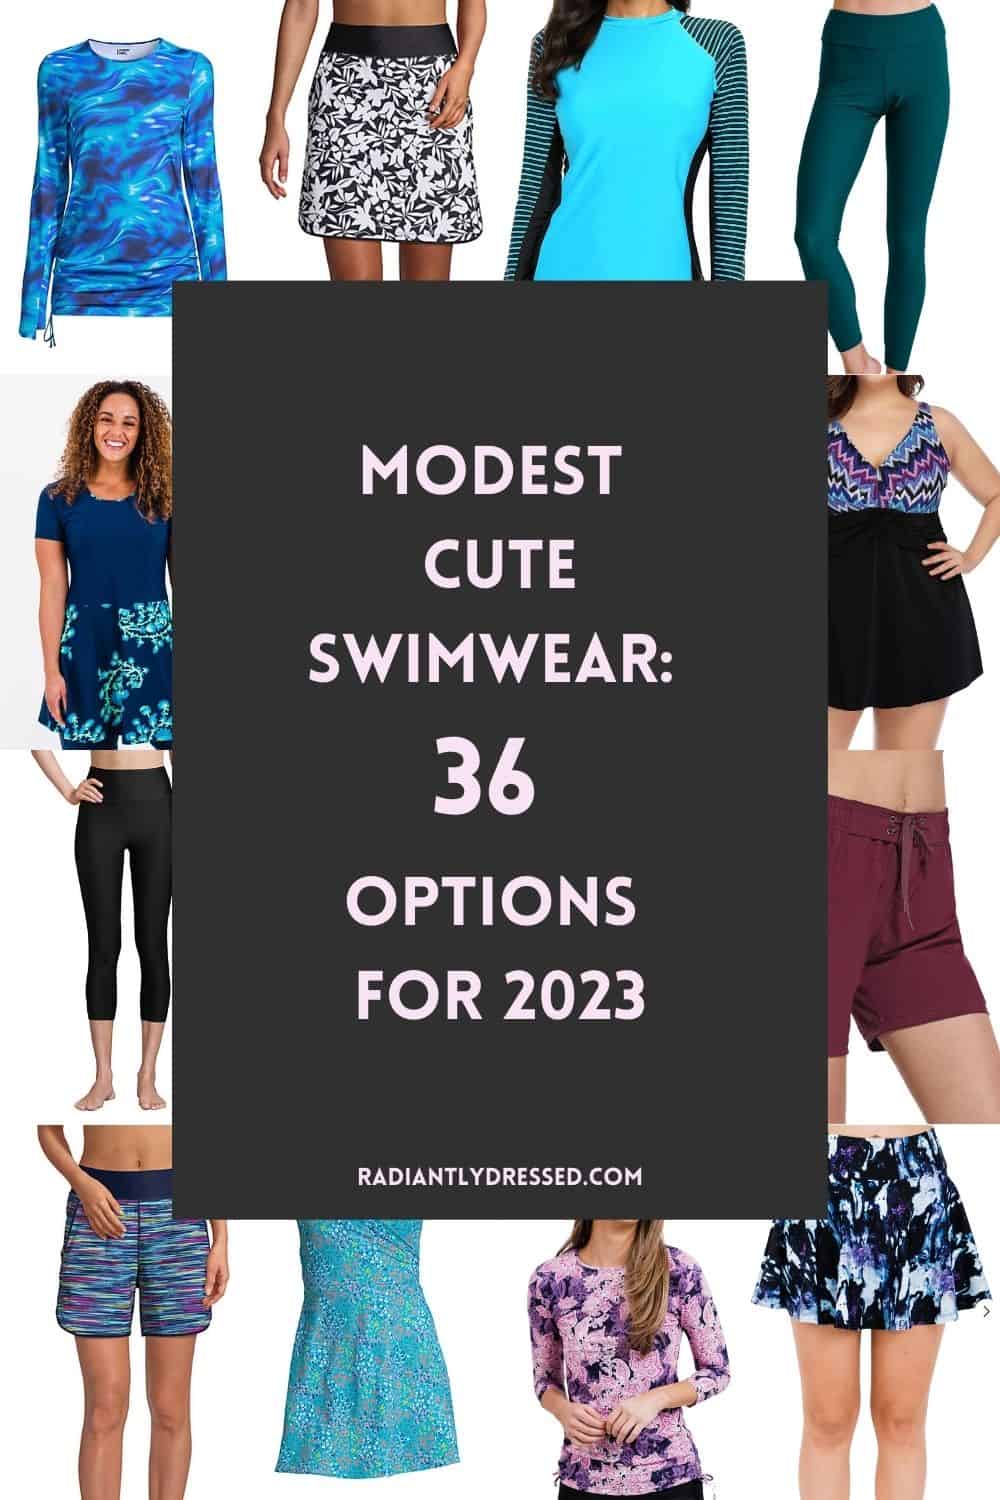 10 Sites For Cute Modest Swimsuits + Our 2023 Picks!